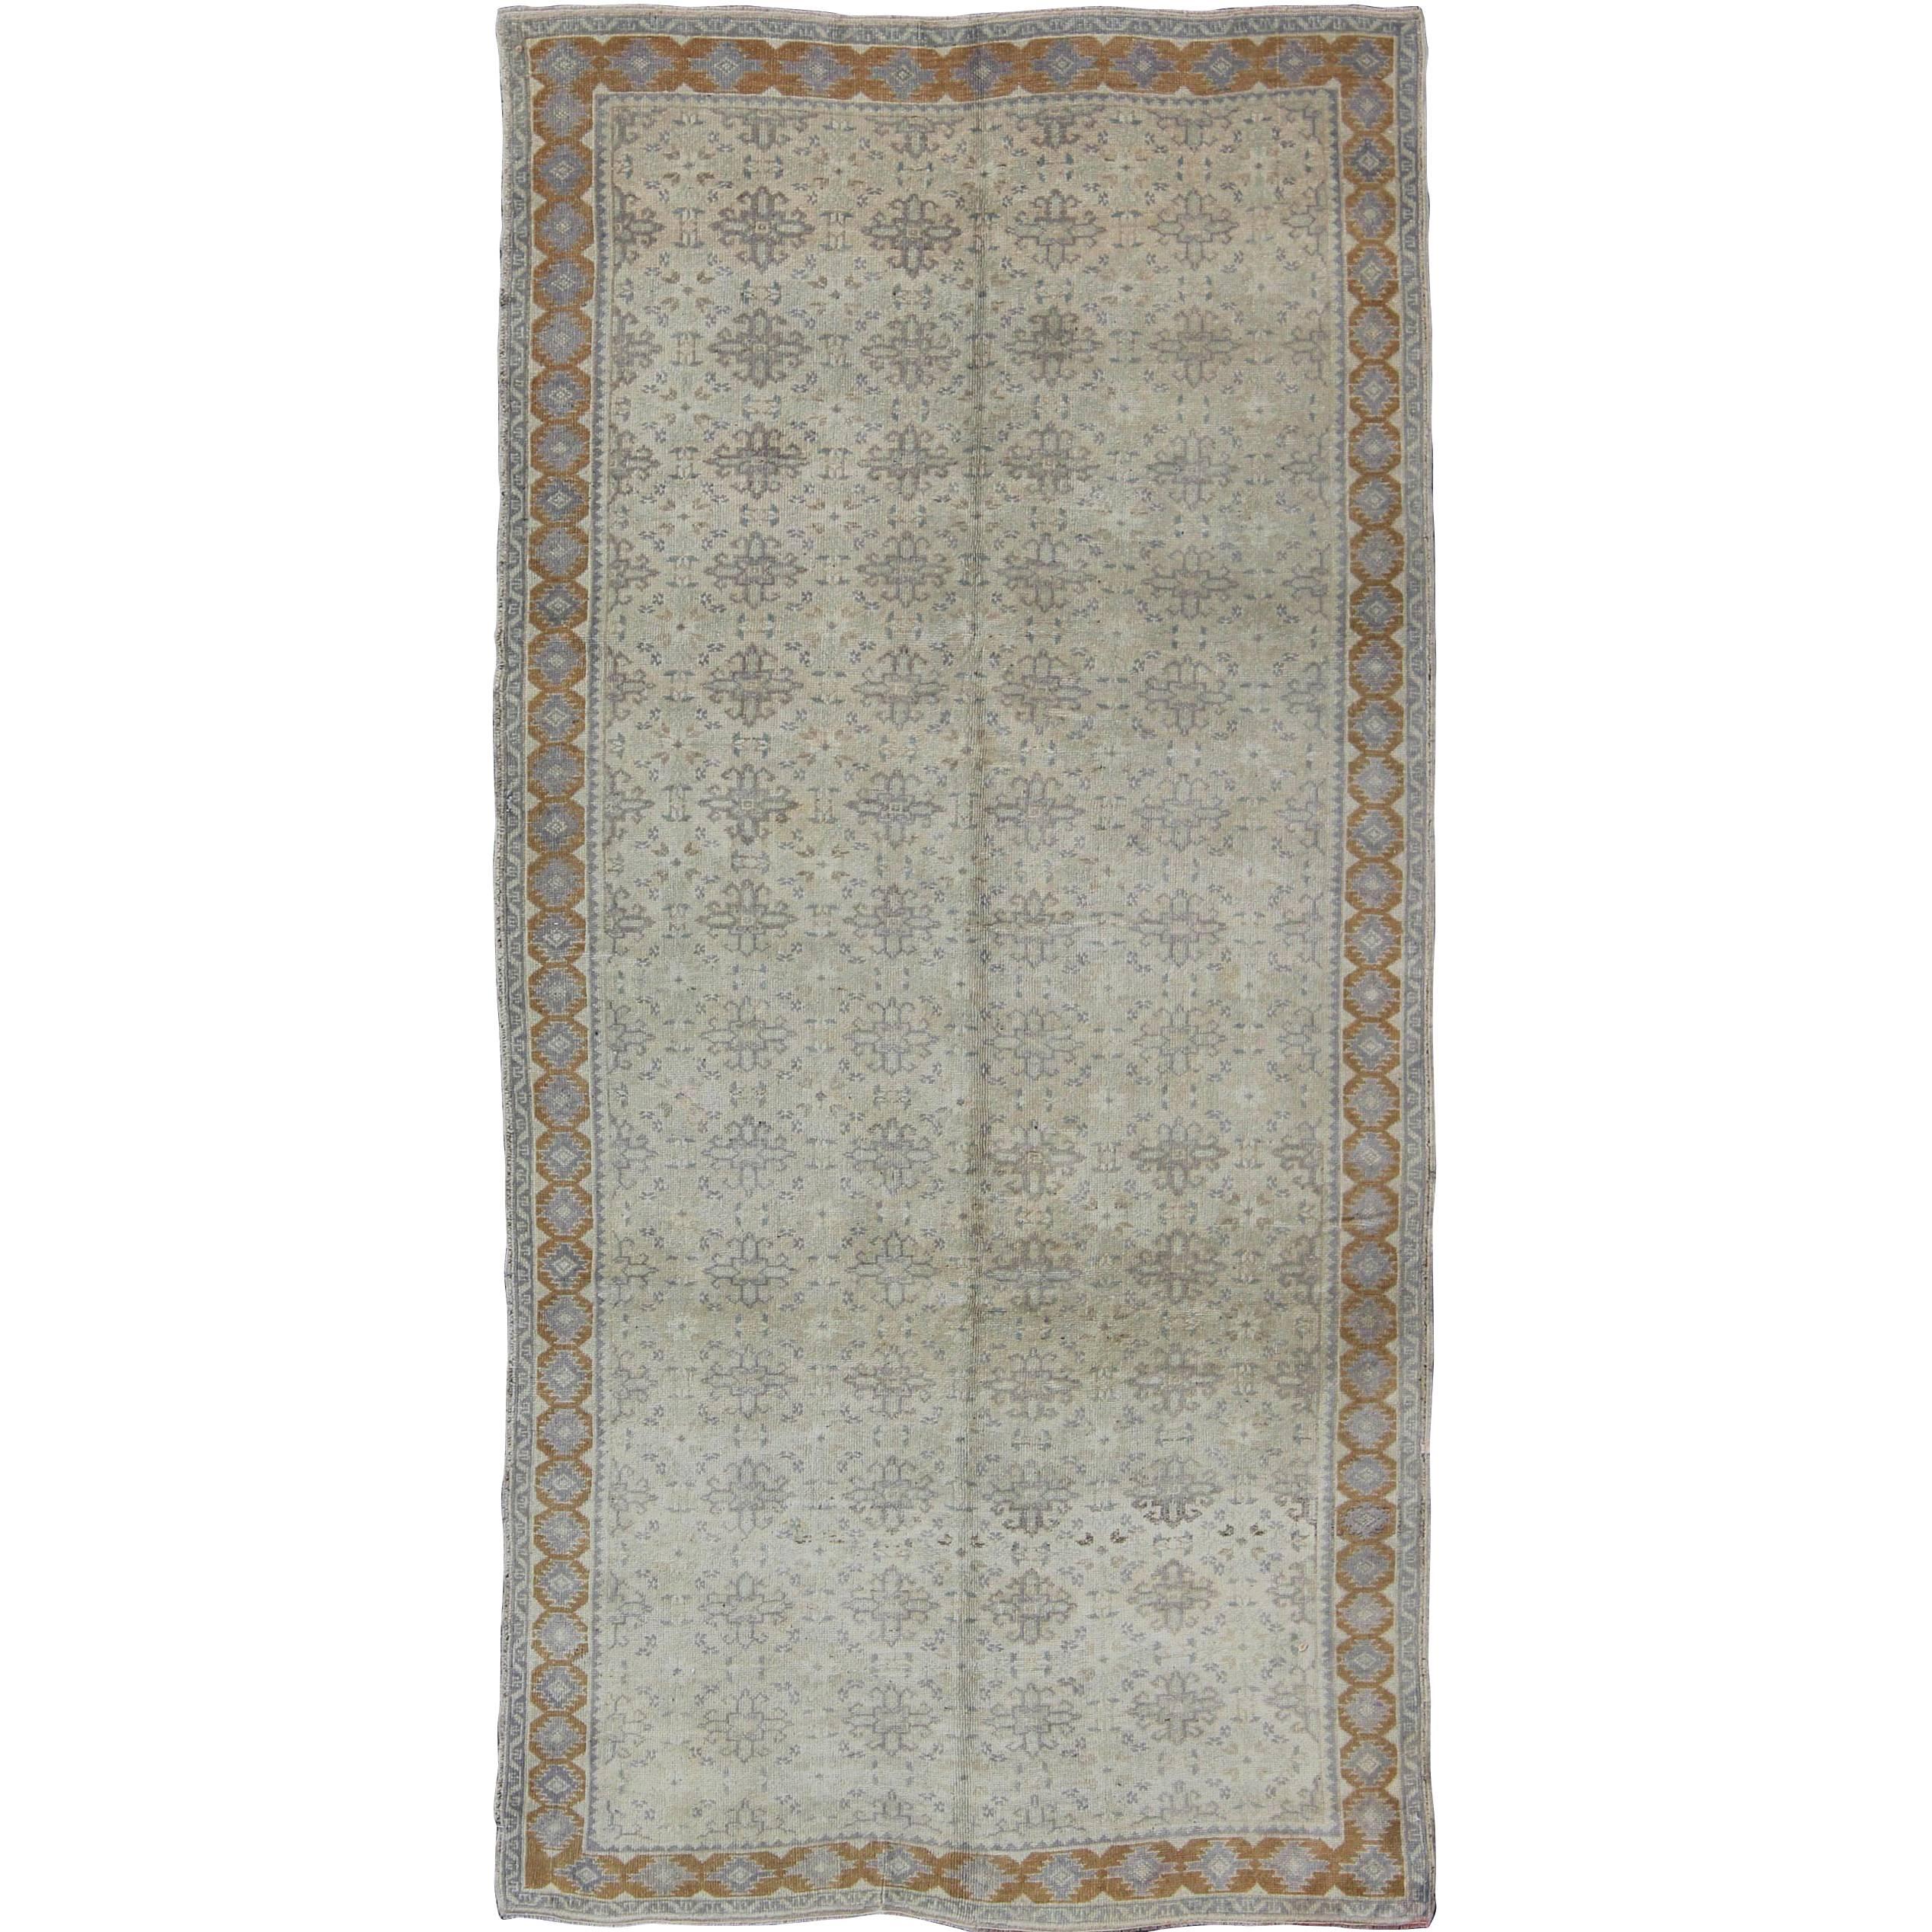 Vintage Turkish Oushak Rug with Gray and White Floral Design & Geometric Border